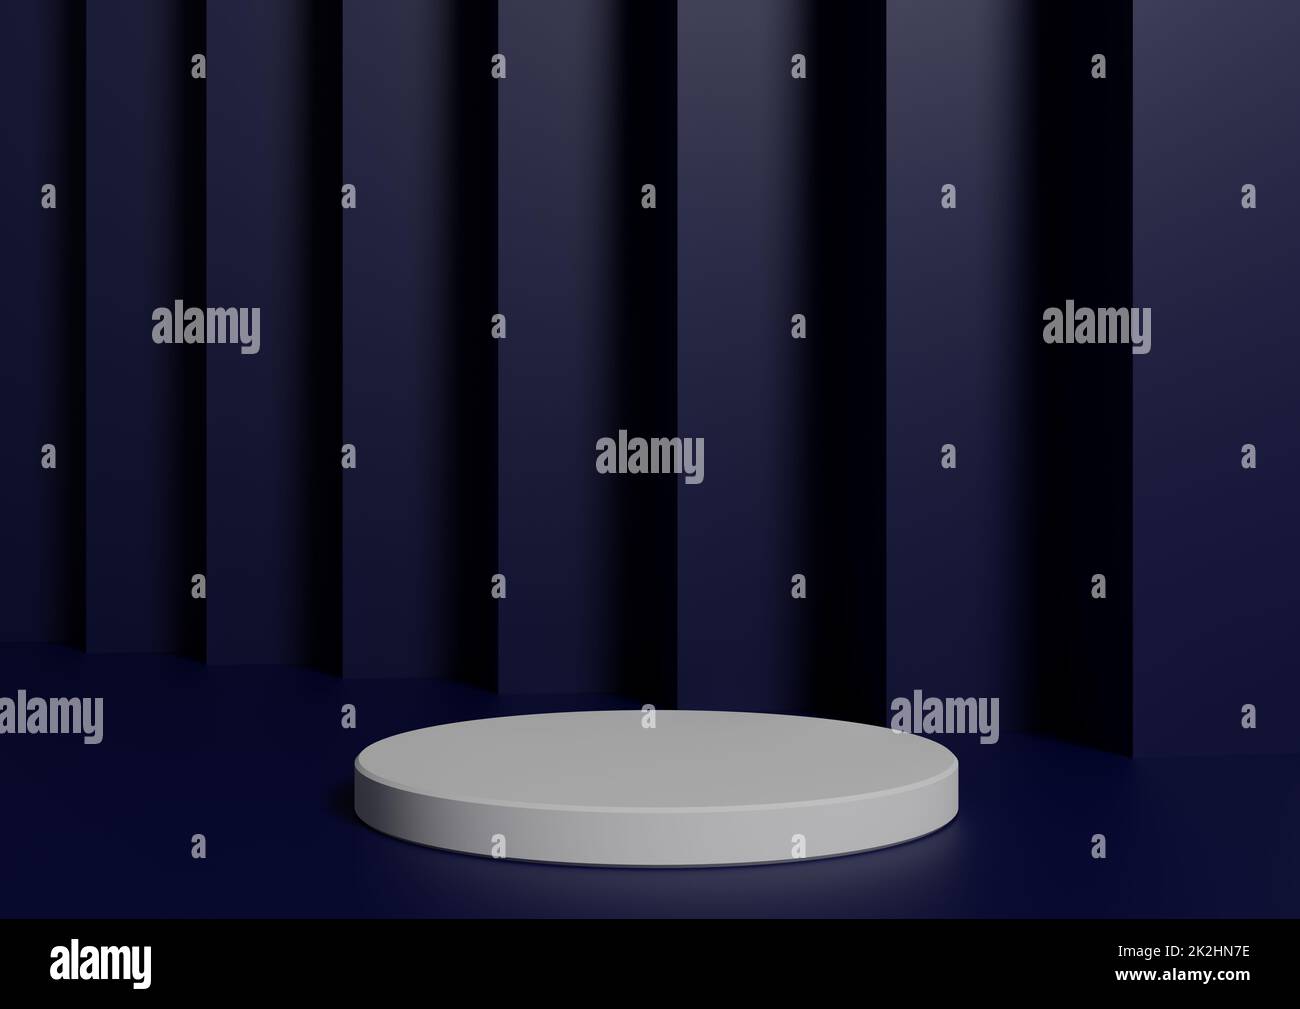 Simple, Minimal 3D Render Composition with One White Cylinder Podium or Stand on Abstract Navy Blue Background for Product Display Stock Photo